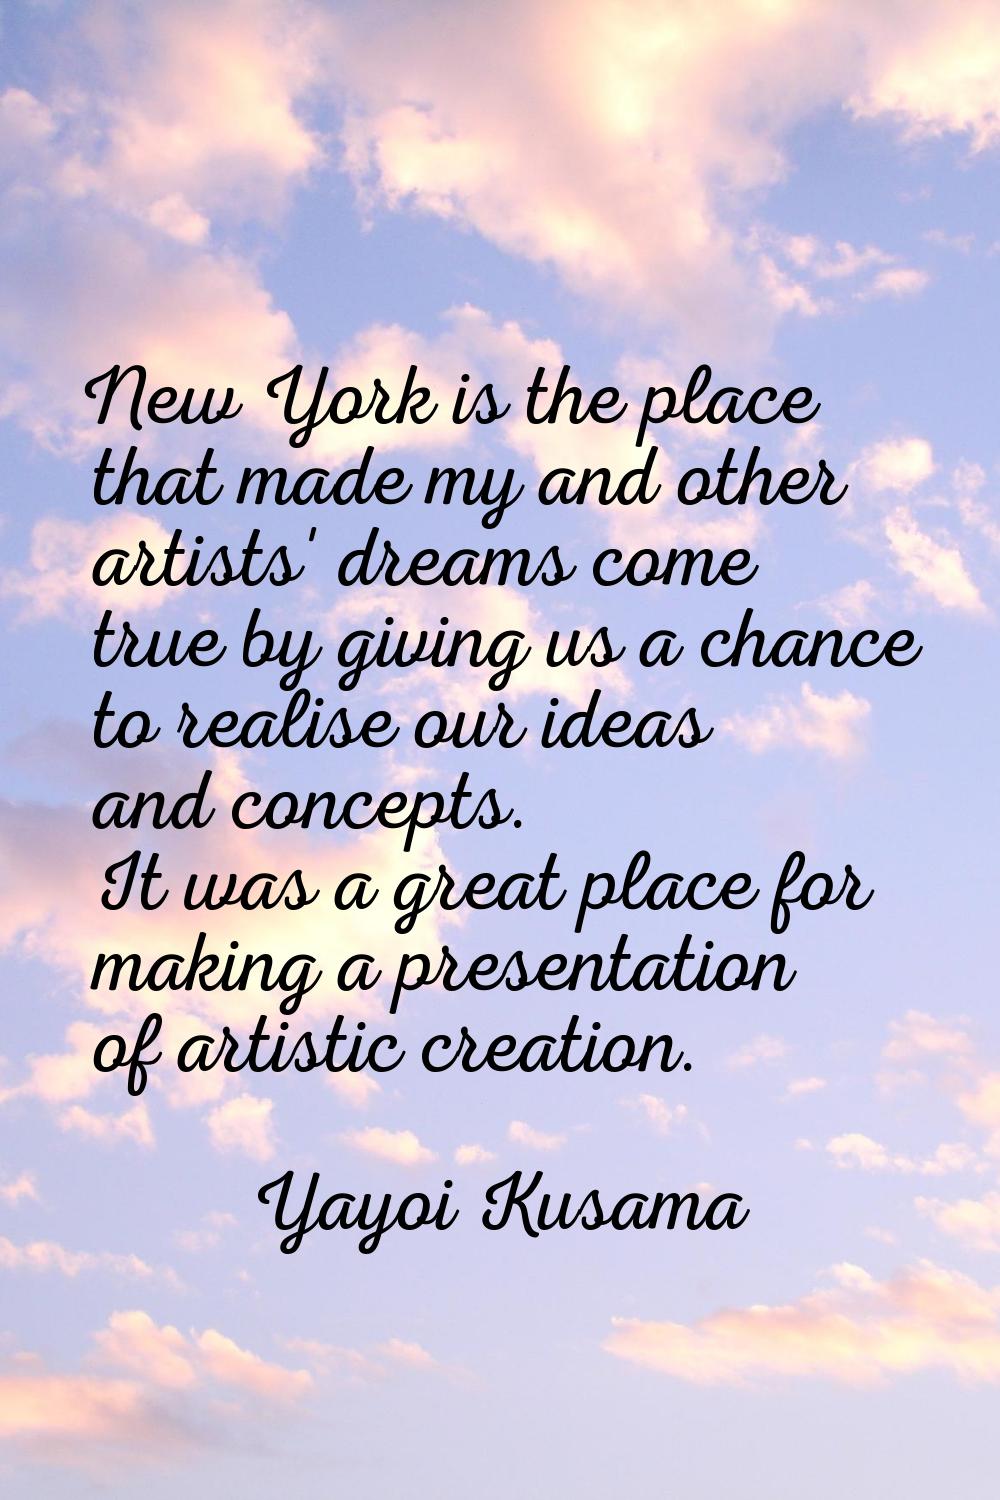 New York is the place that made my and other artists' dreams come true by giving us a chance to rea